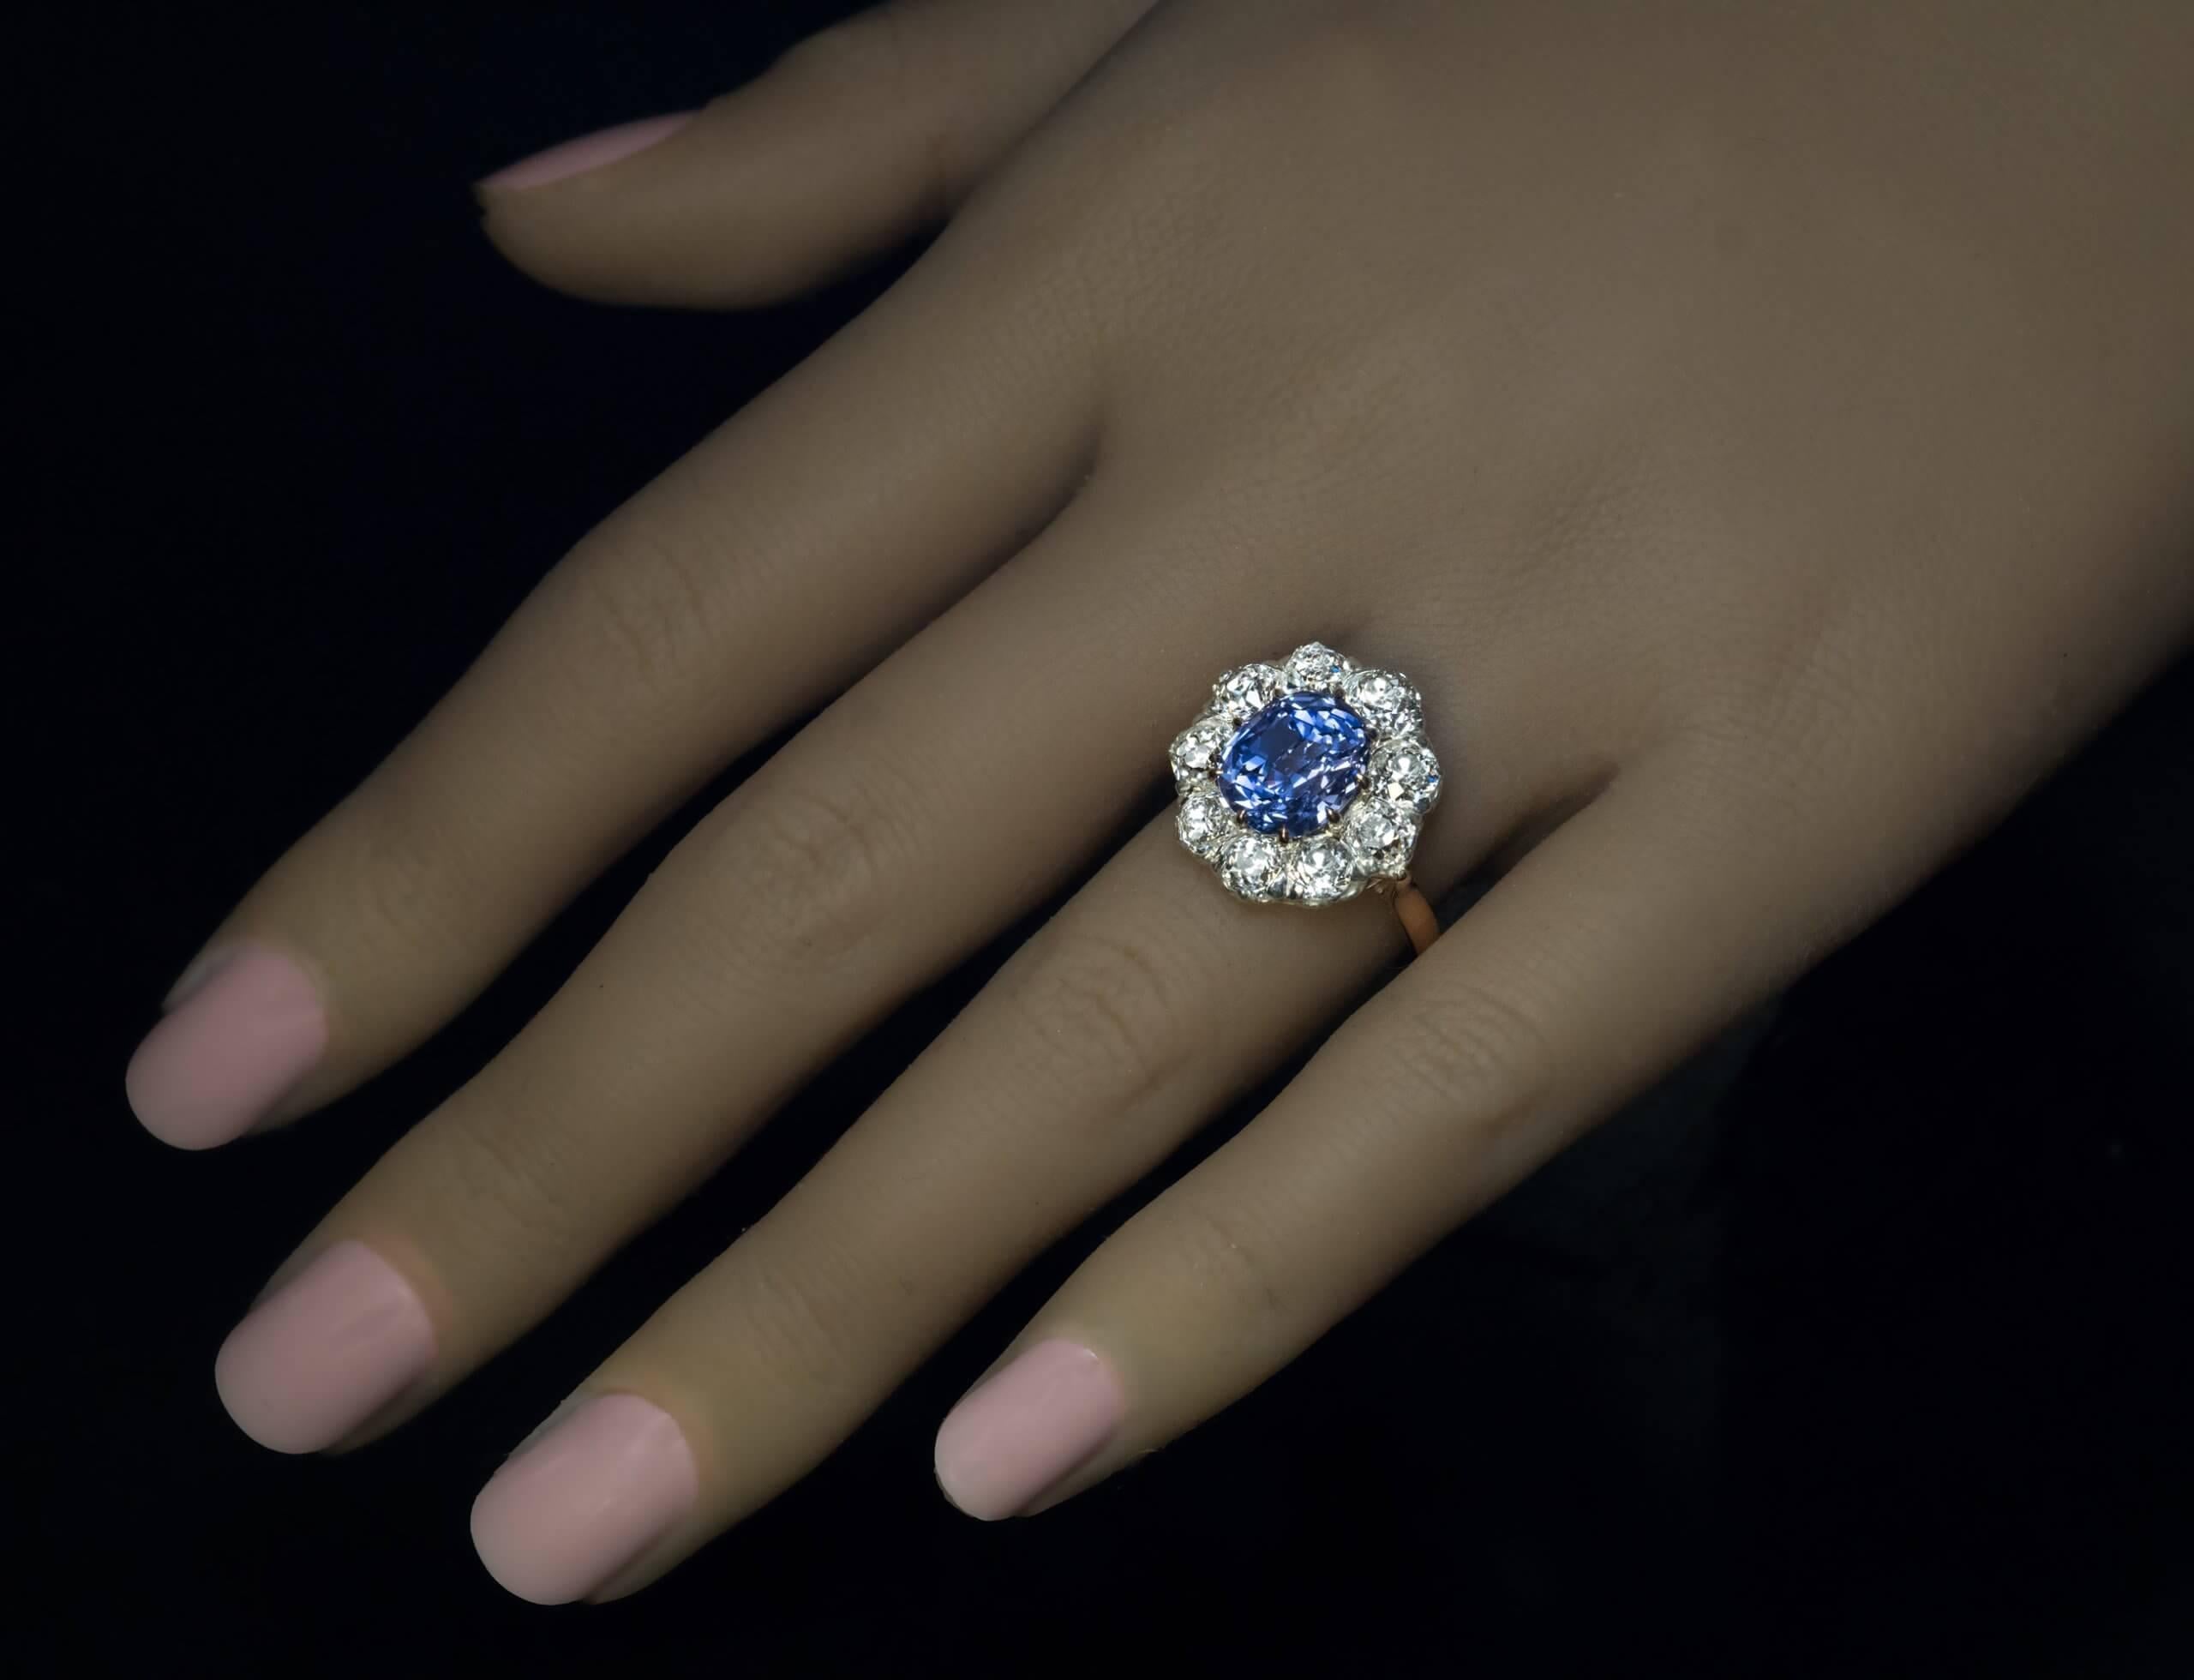 Circa 1920s

This vintage engagement ring of a classic cluster design is crafted in platinum and 18K gold. The ring features a high quality 4.70 ct unheated Ceylon sapphire of an excellent light blue color with some violetish hue.

The sapphire is